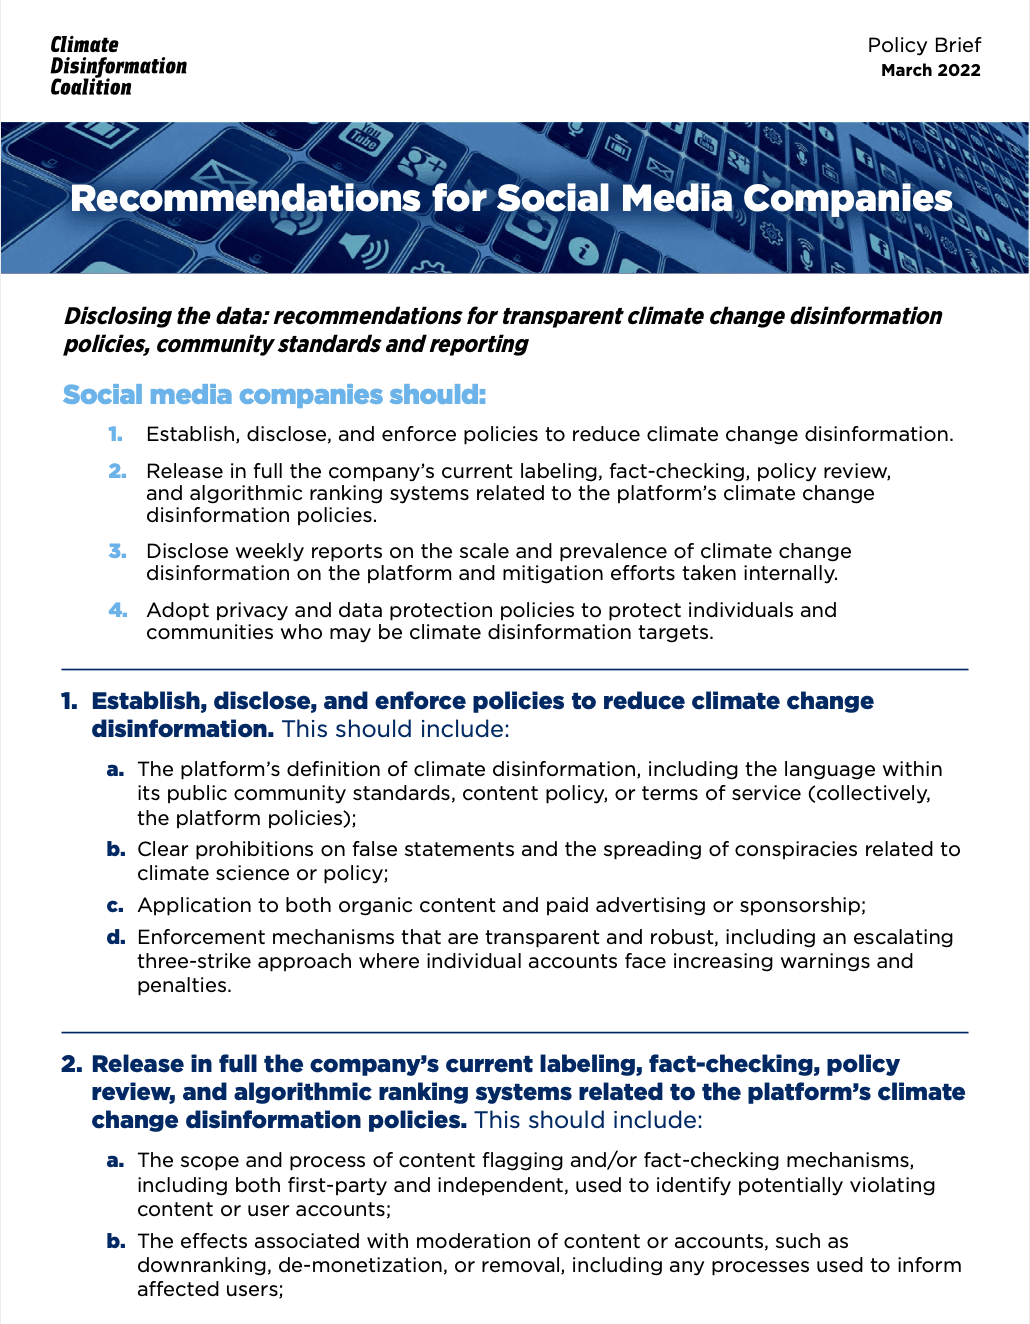 Recommendations for Social Media Companies